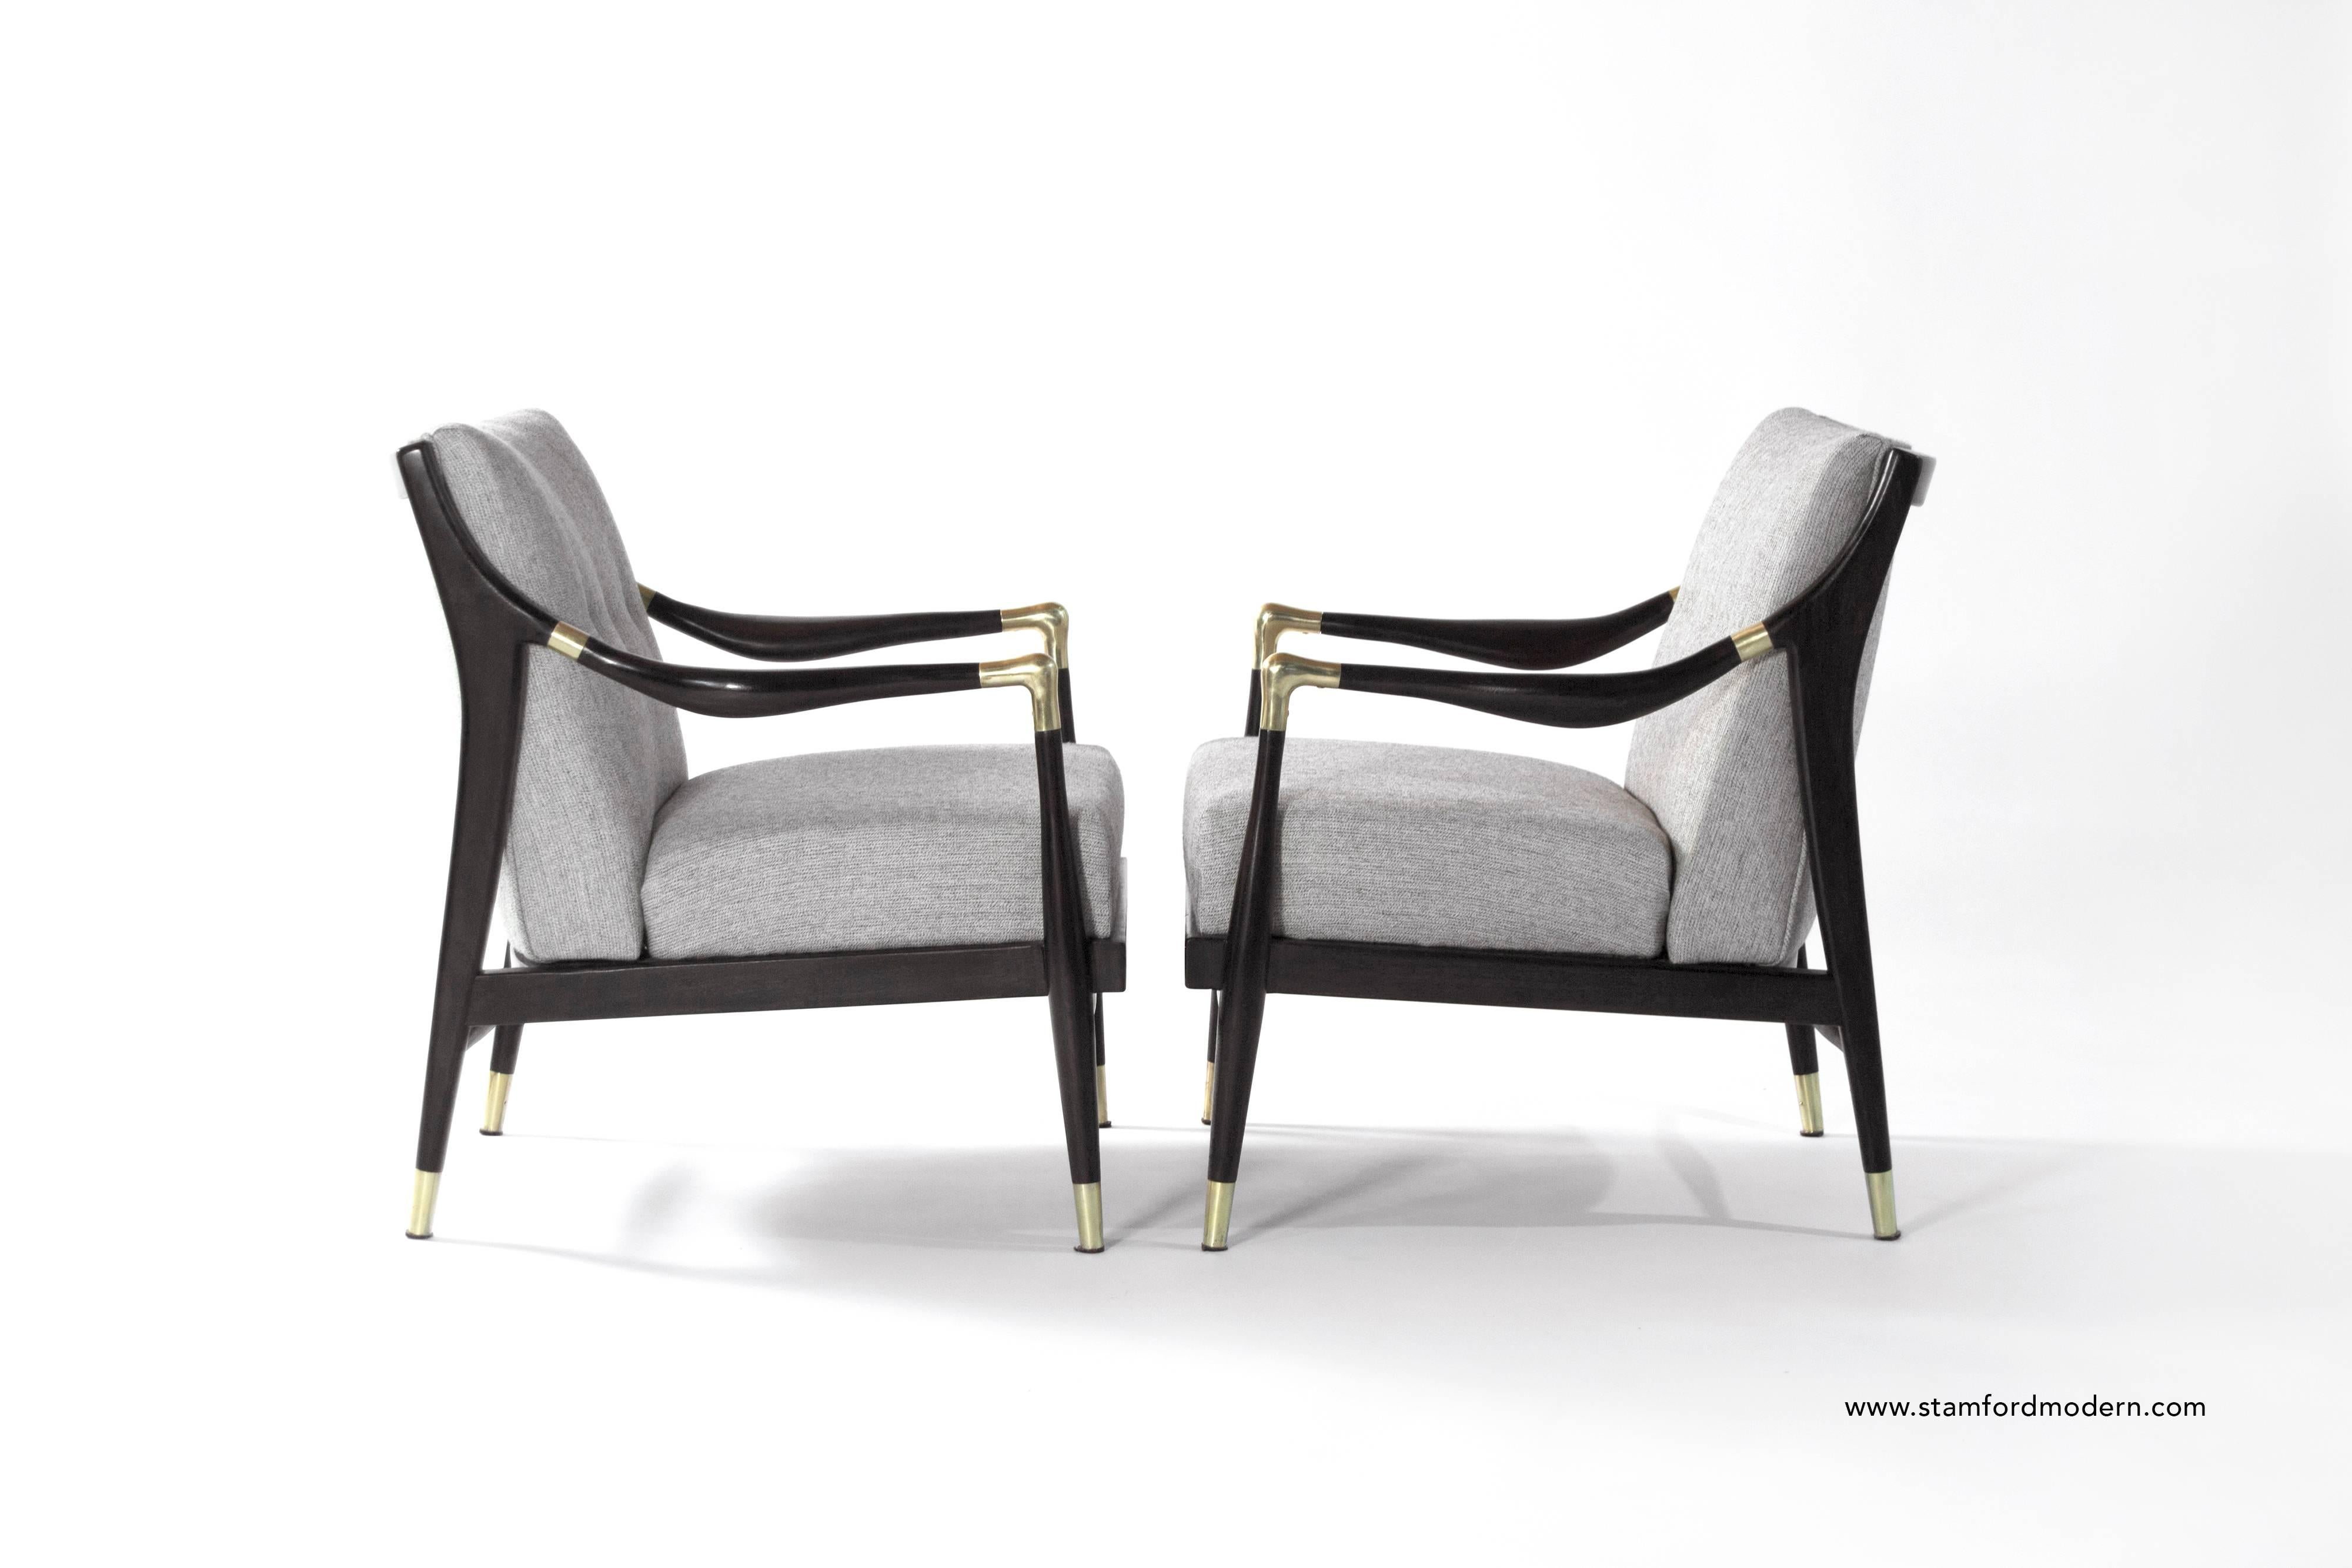 A gorgeous pair of sculptural lounge chairs with brass accents on arms and sabots in the style of Gio Ponti.